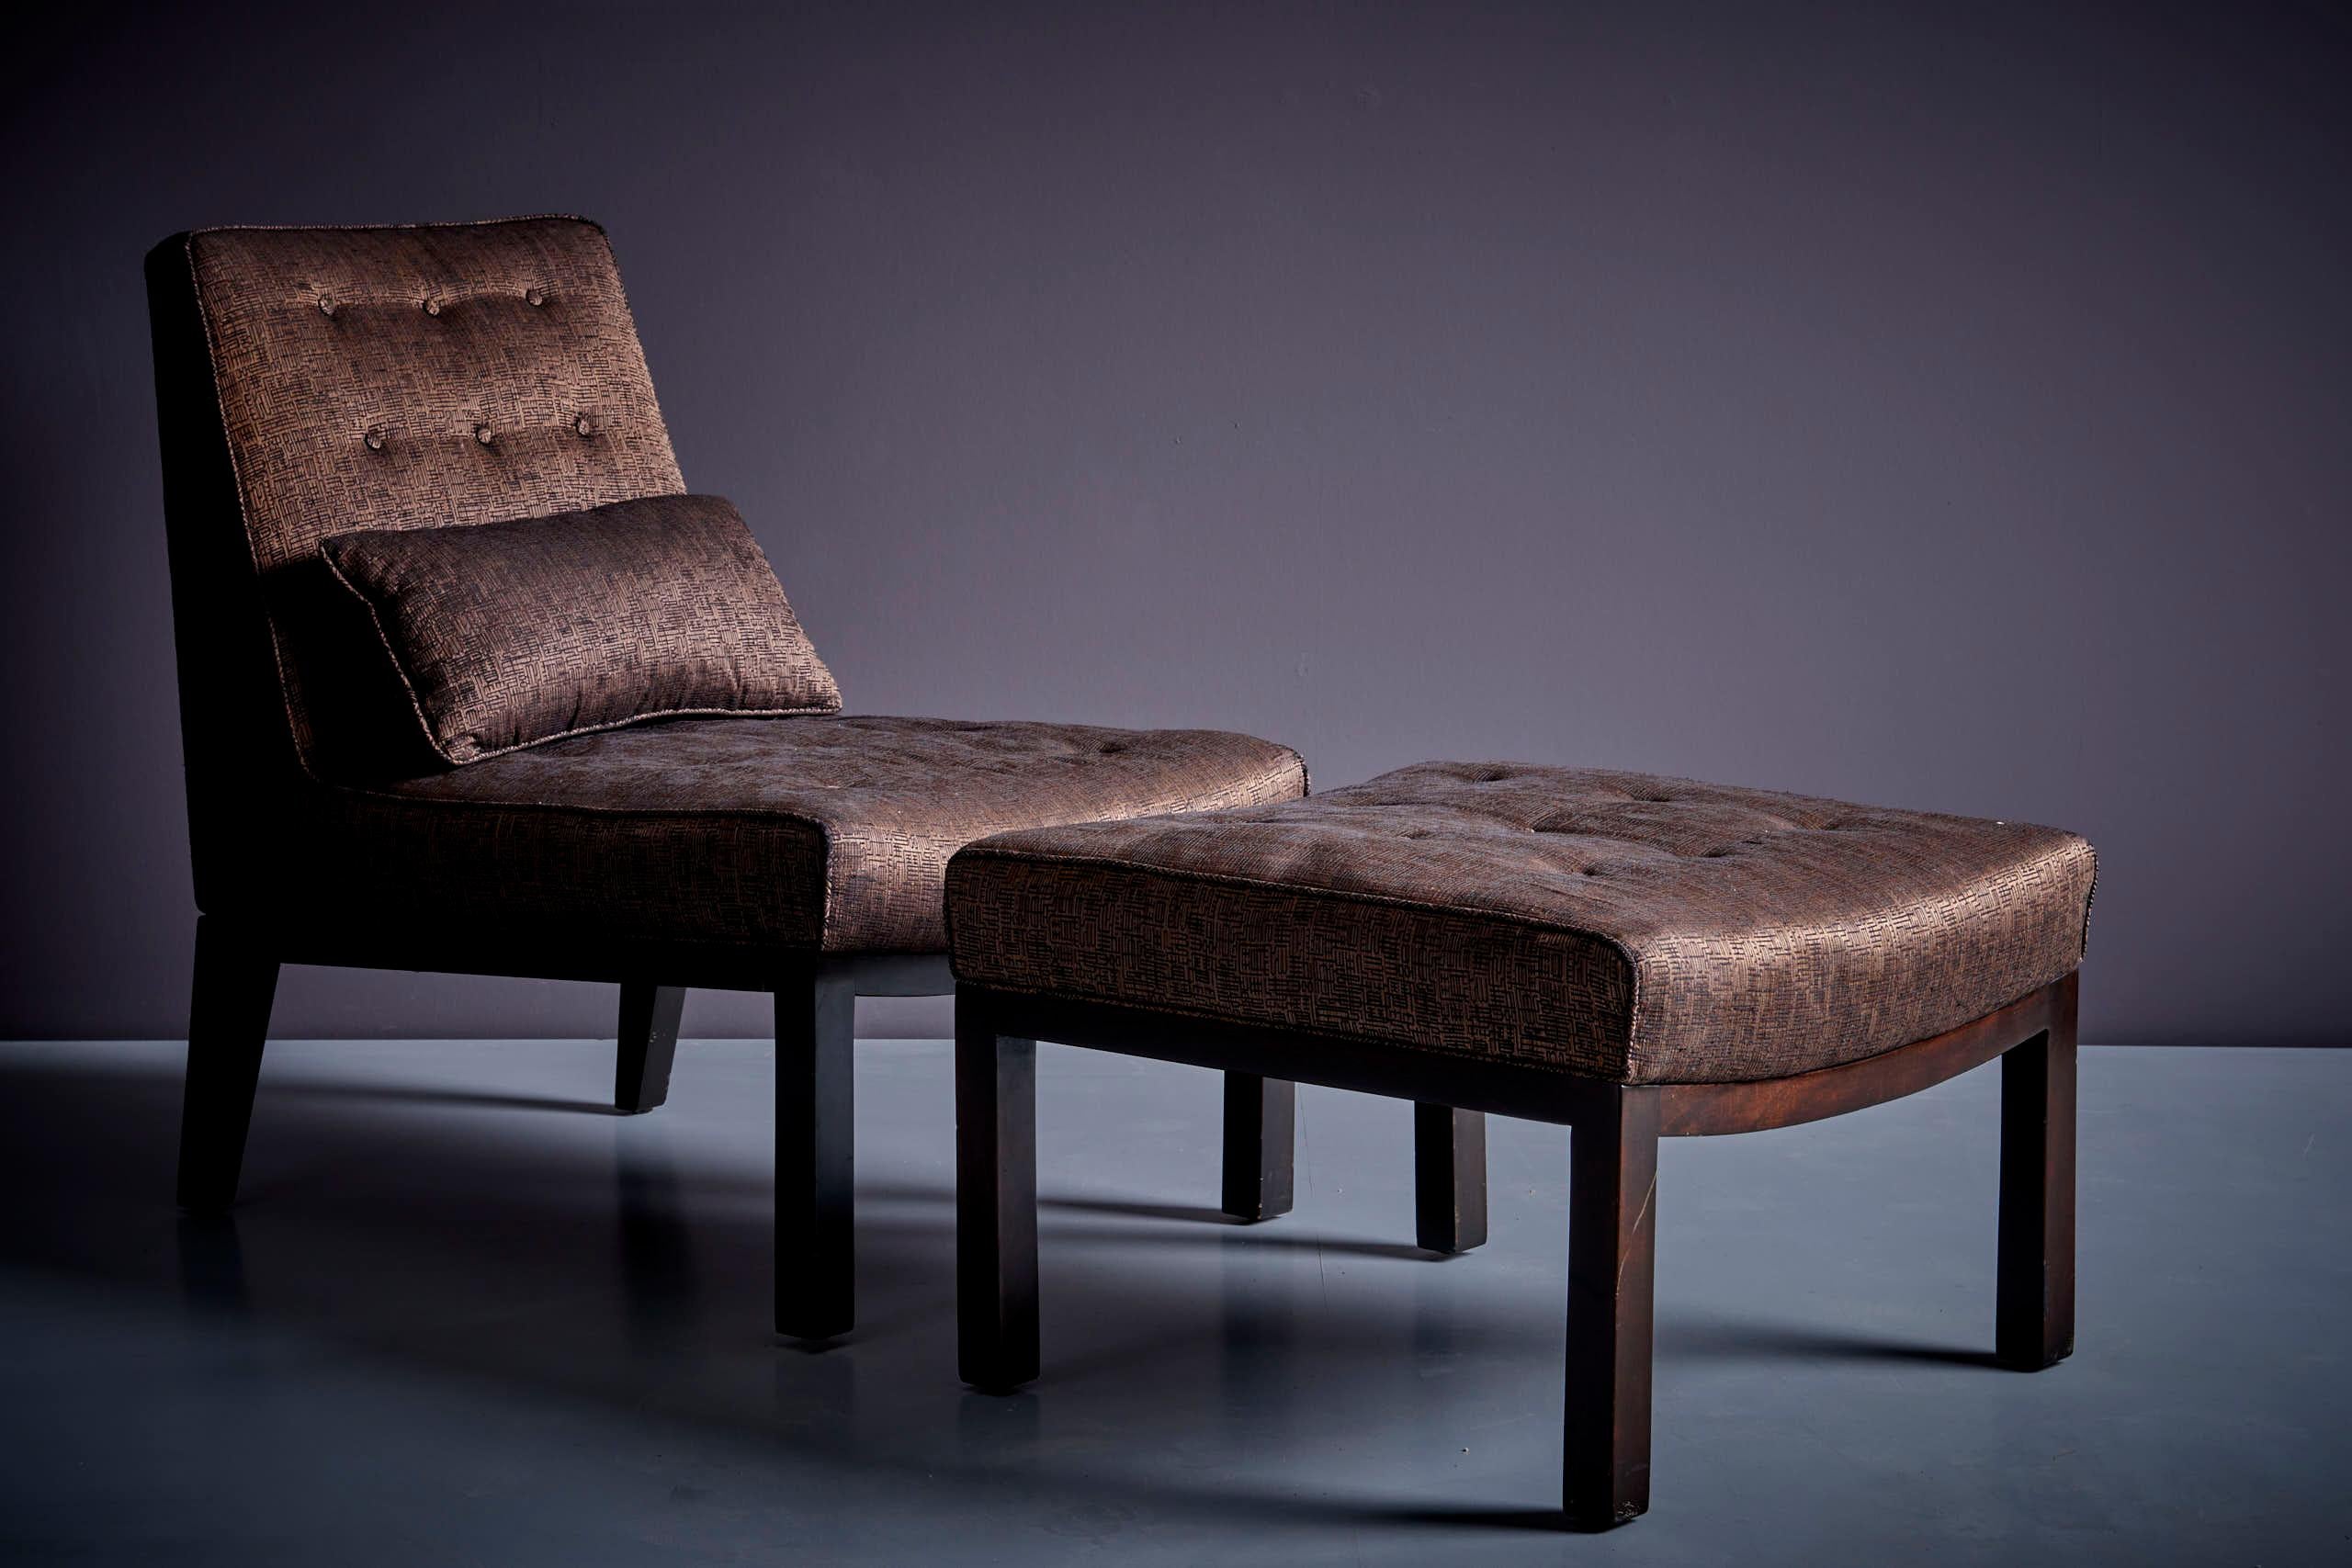 Edward Wormley lounge chair with ottoman by Dunbar, USA 1960s
Dunbar lounge chair with ottoman. The measurements given apply to the Lounge Chair. The ottoman measures 60cm depth, 60cm width, 40cm height and 40cm seat height. 
The chair and ottoman